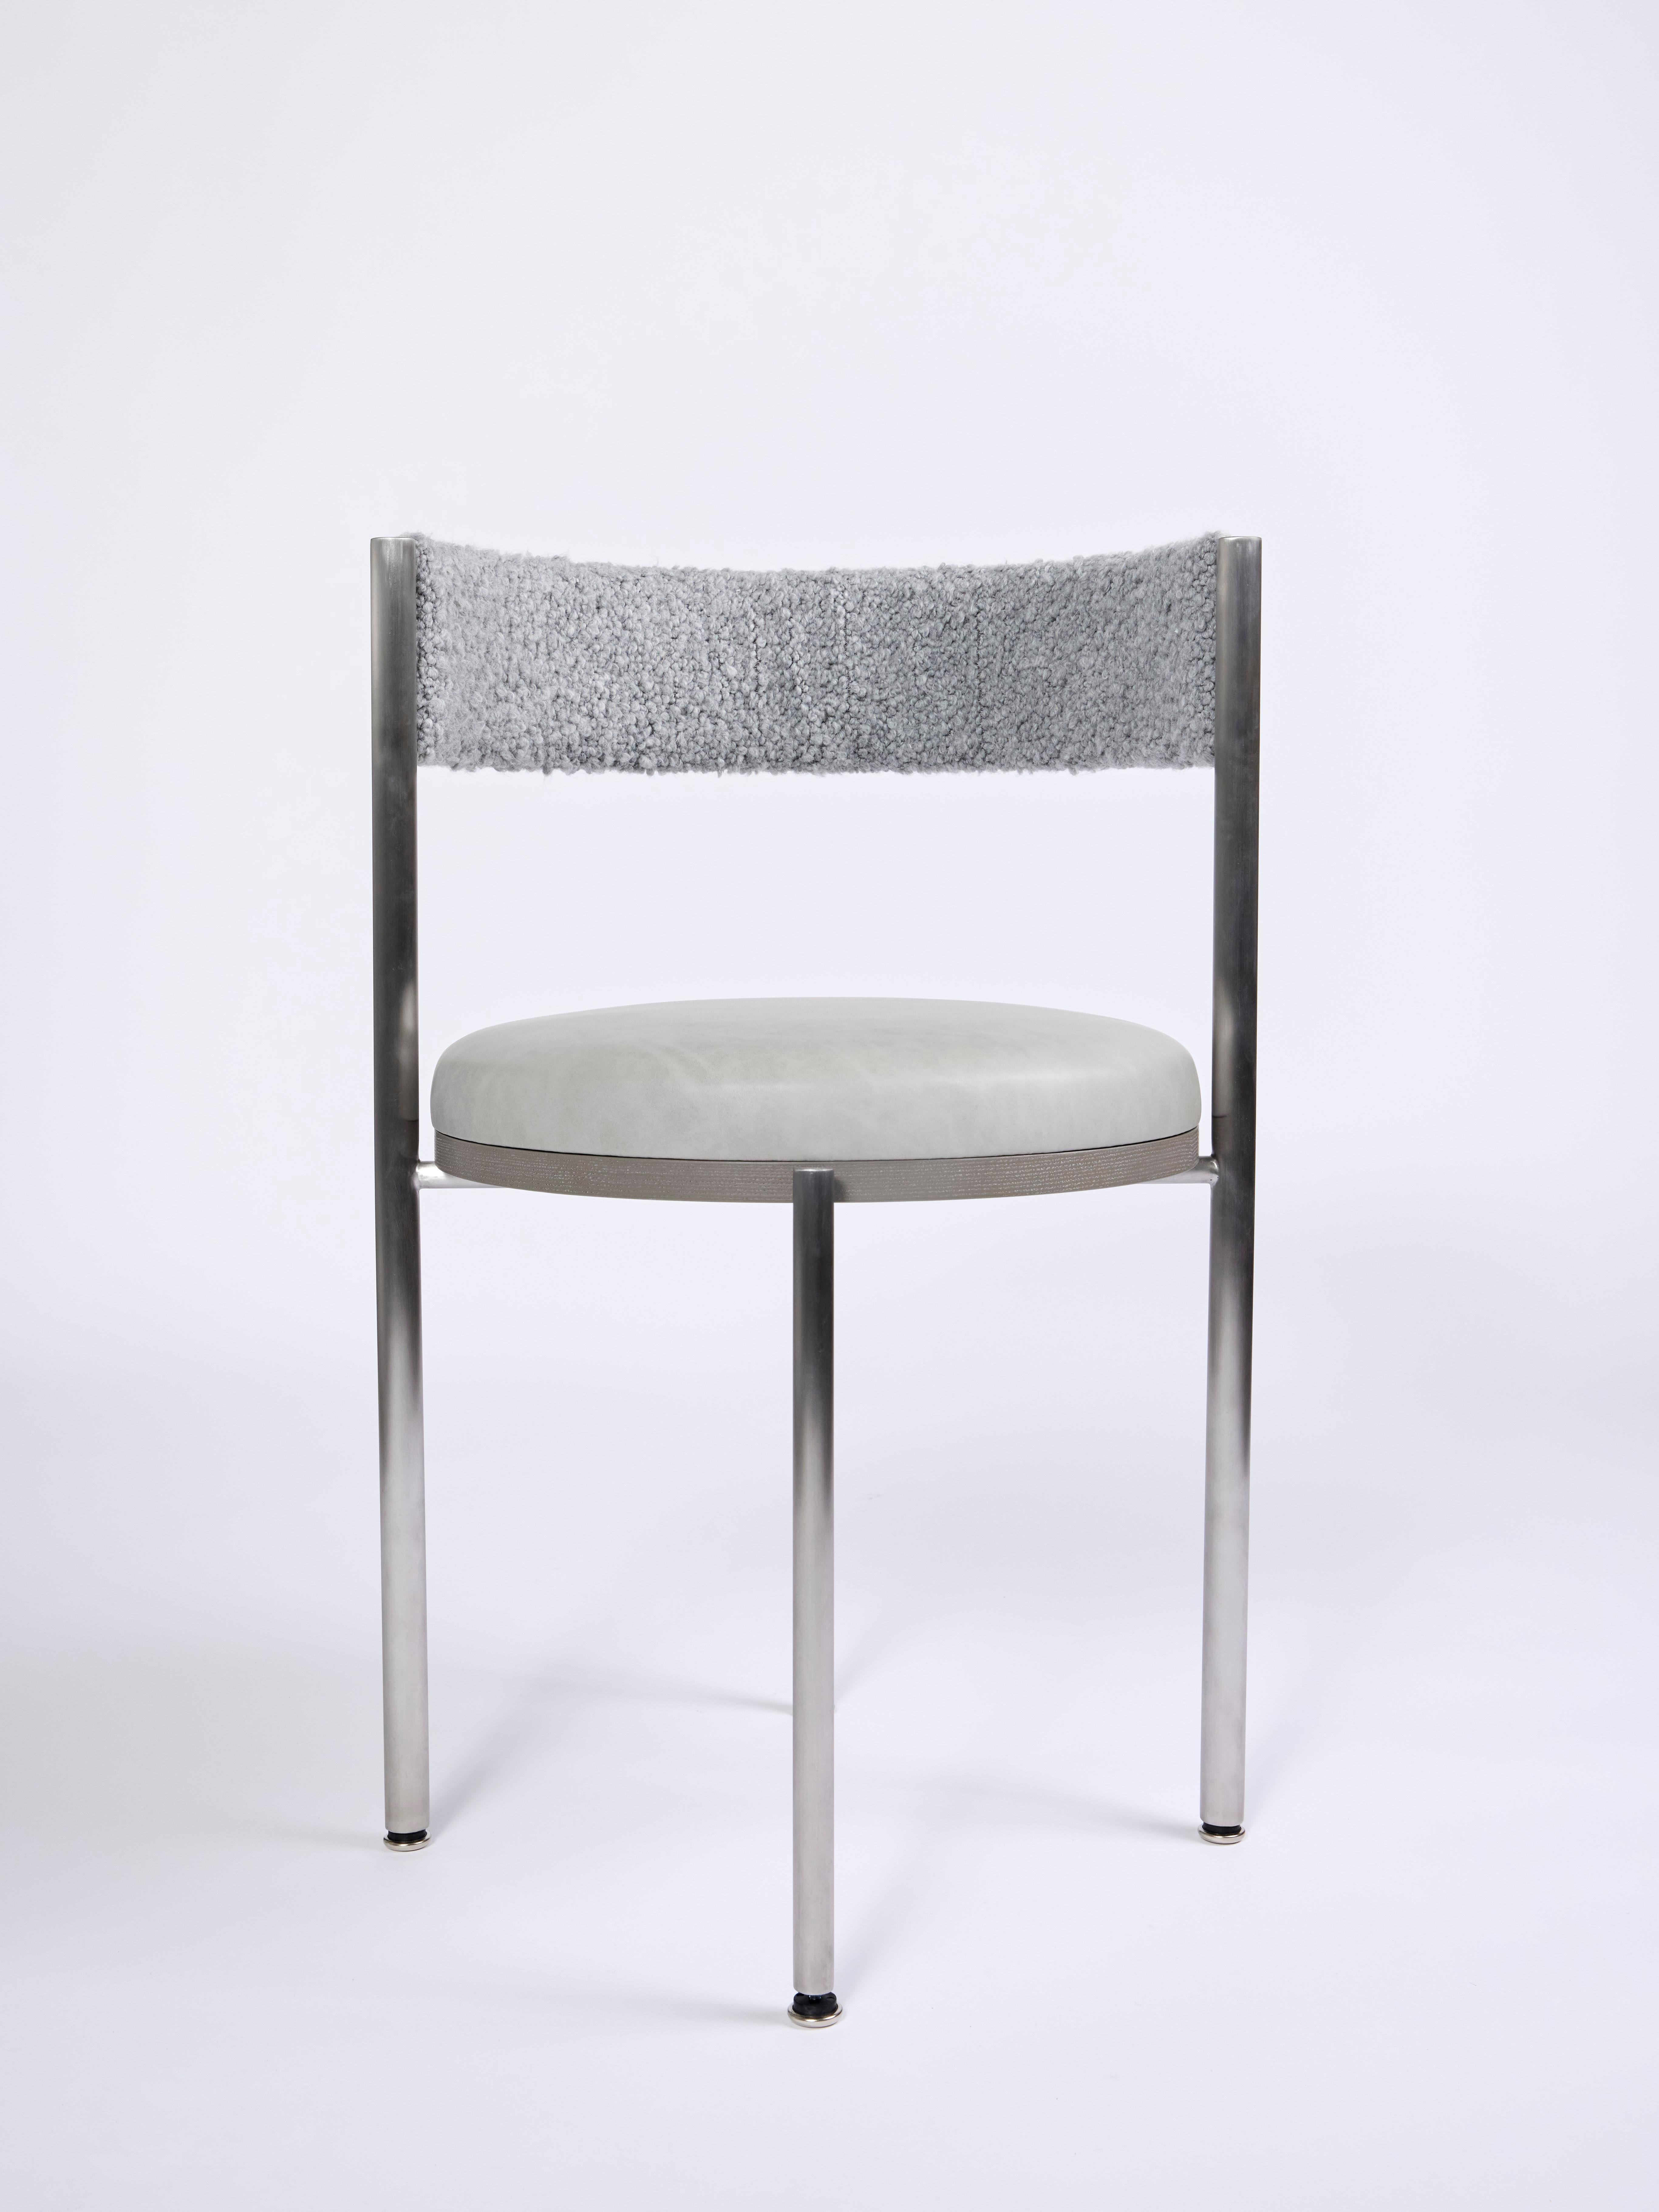 Kaleidoscope Dining Chair

Materials: stainless, leather, boucle, wood, foam 
Dimensions: 19”W x 19”D x 29”H

A monochromatic chair based on the infinite combinations of gray as color, material, and form. The limited use of color enhances the